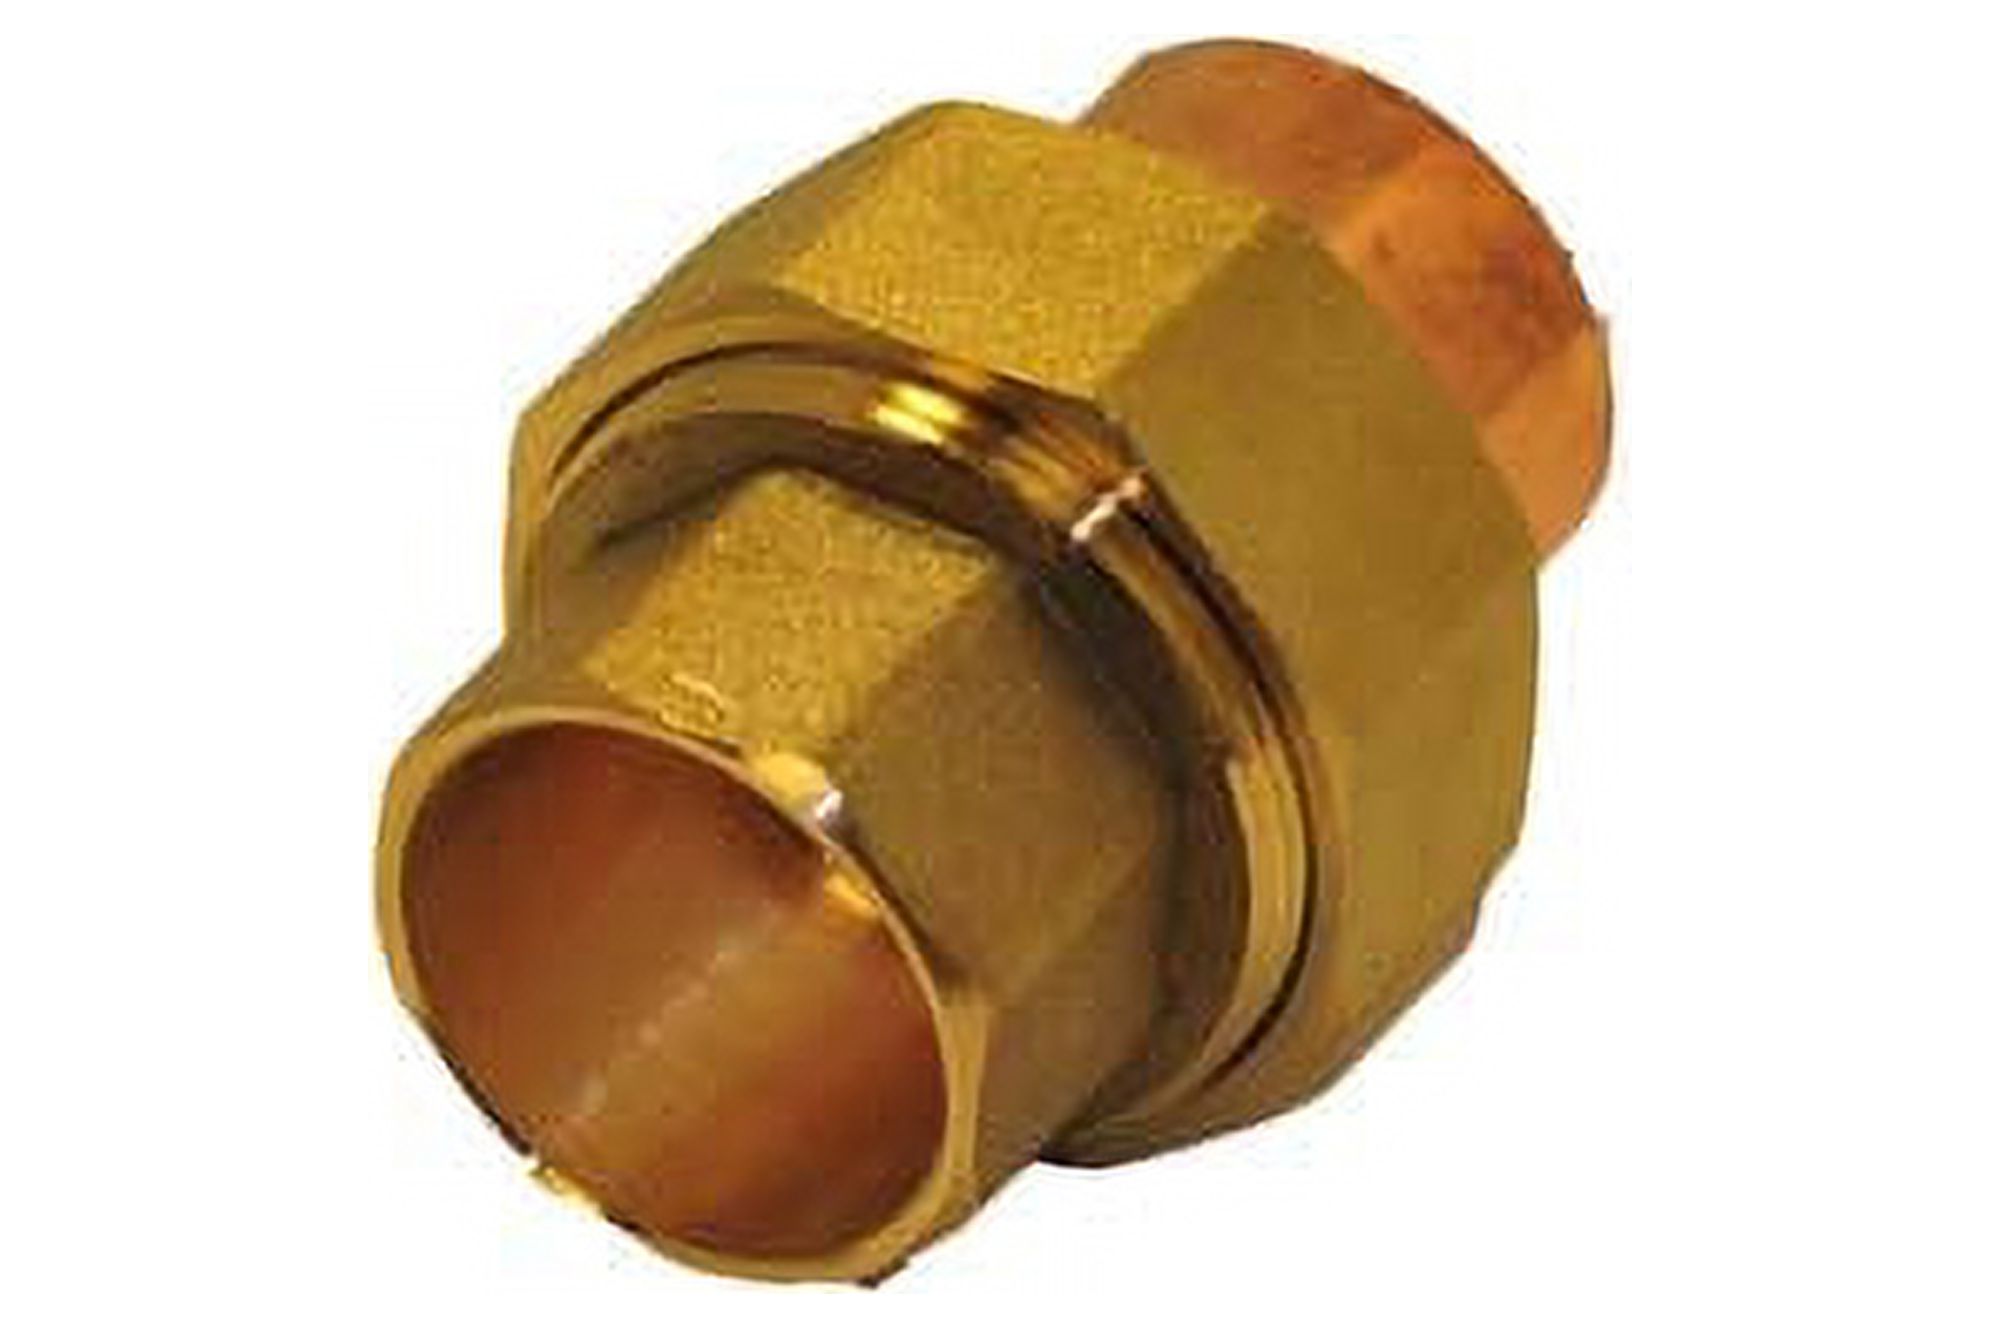 Libra Supply 1-1/2 inch Lead Free Copper Sweat Union C x C (Copper + Brass + Copper) Solder Joint, (click in for more size options)1-1/2'' Copper Pressure Pipe Fitting Plumbing Supply - image 3 of 3